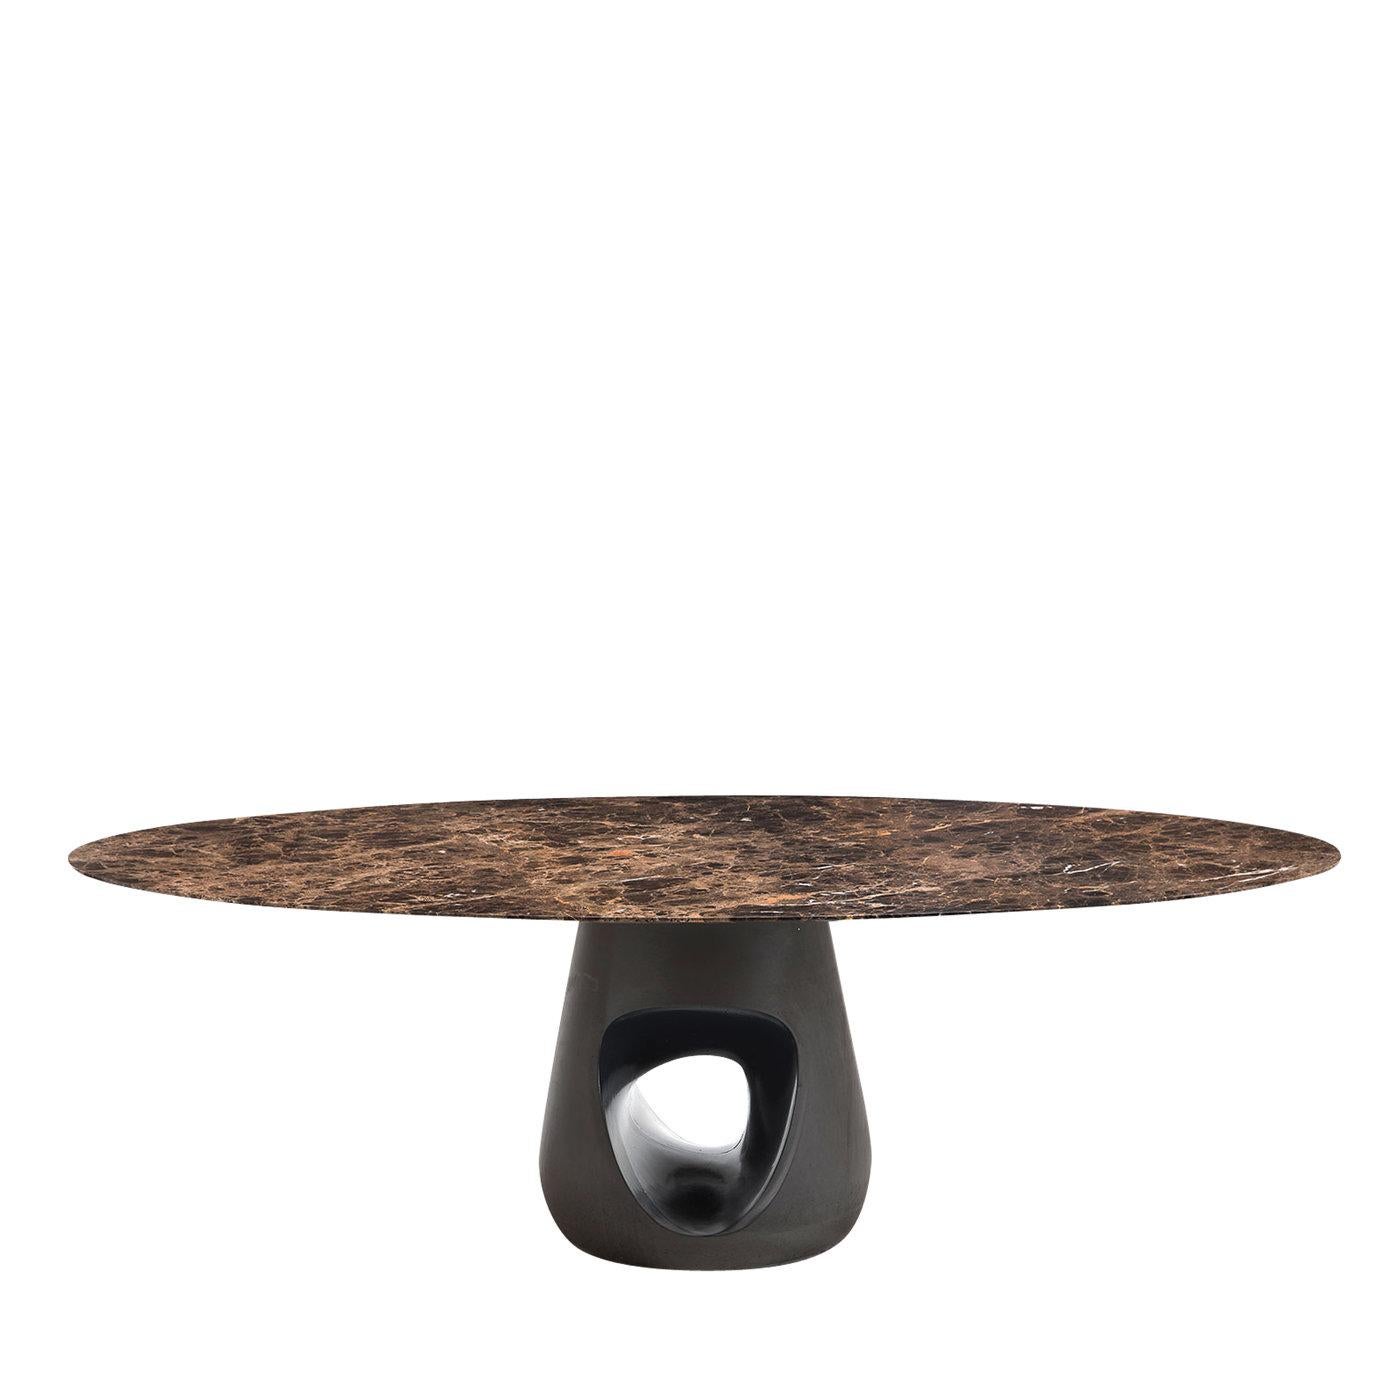 Italian Barbara Dining Table with Emperador Marble Top by Renato Zamberlan For Sale